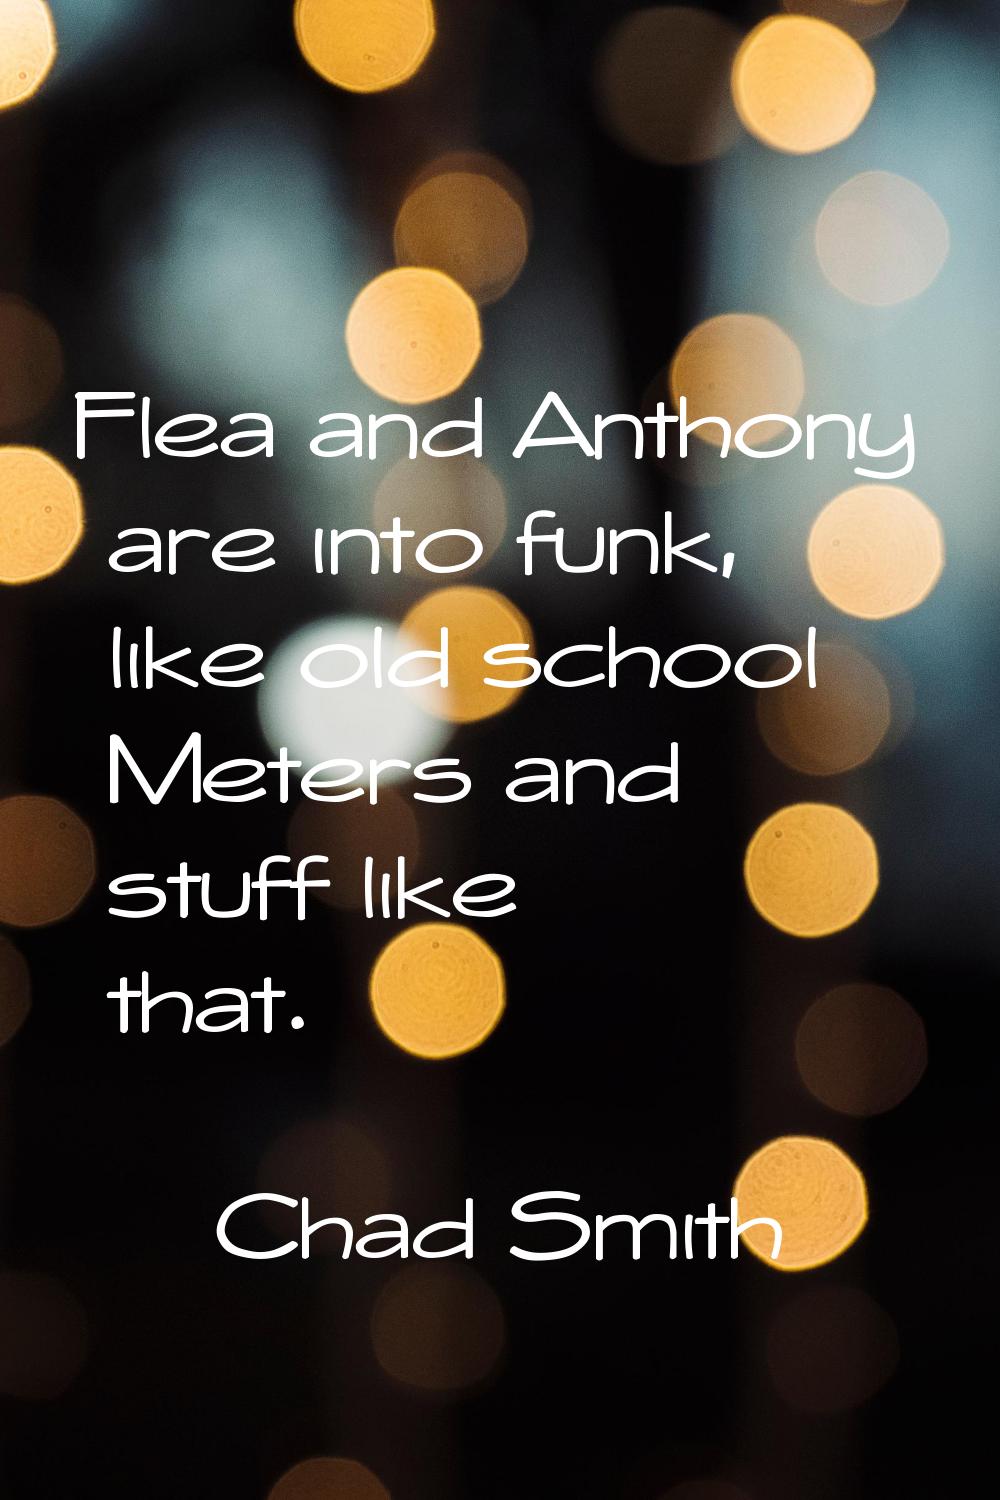 Flea and Anthony are into funk, like old school Meters and stuff like that.